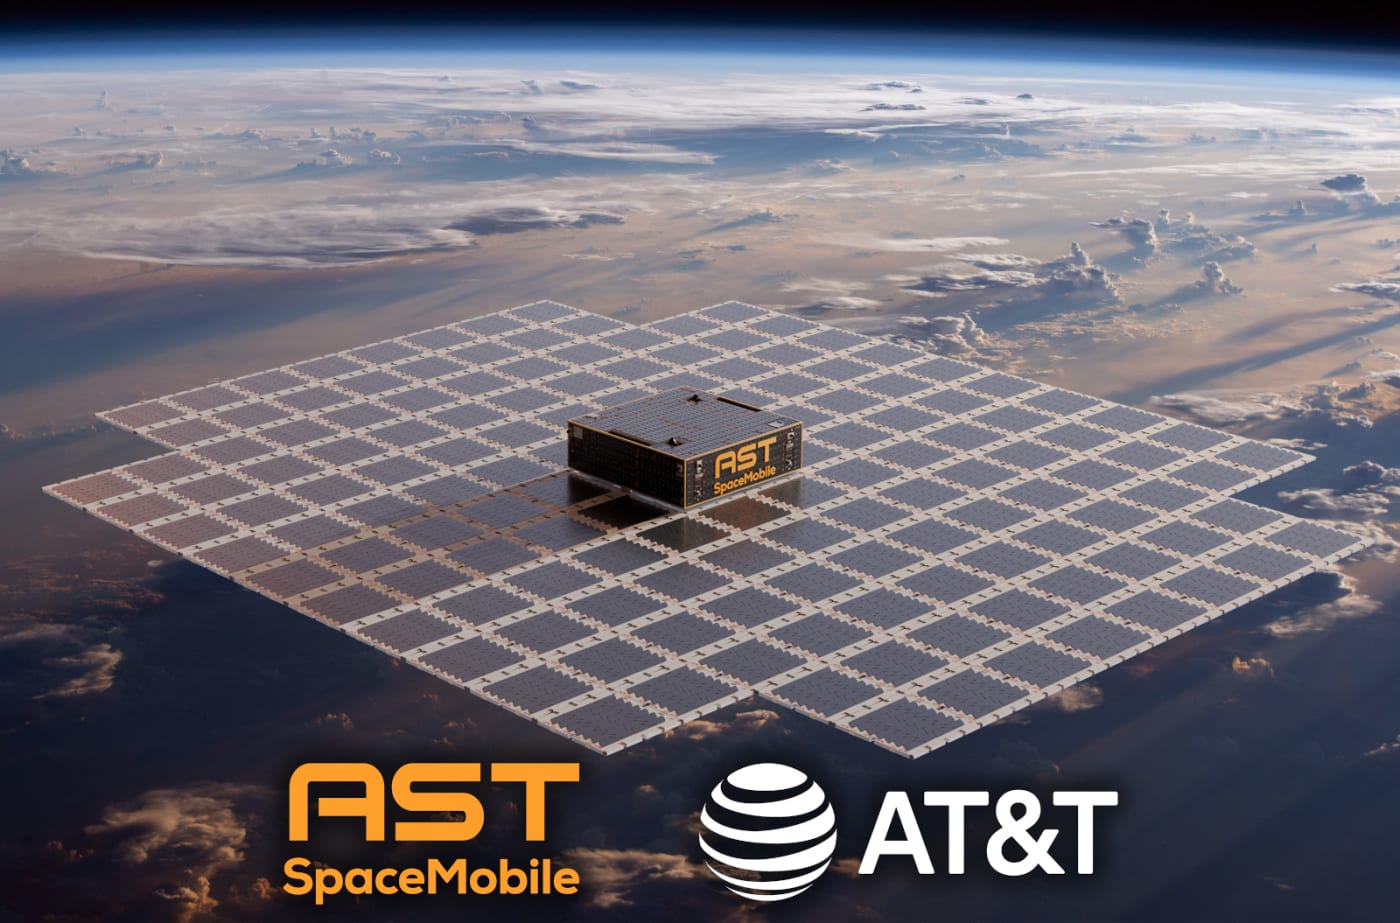 AT&T deal will make every phone a satellite phone